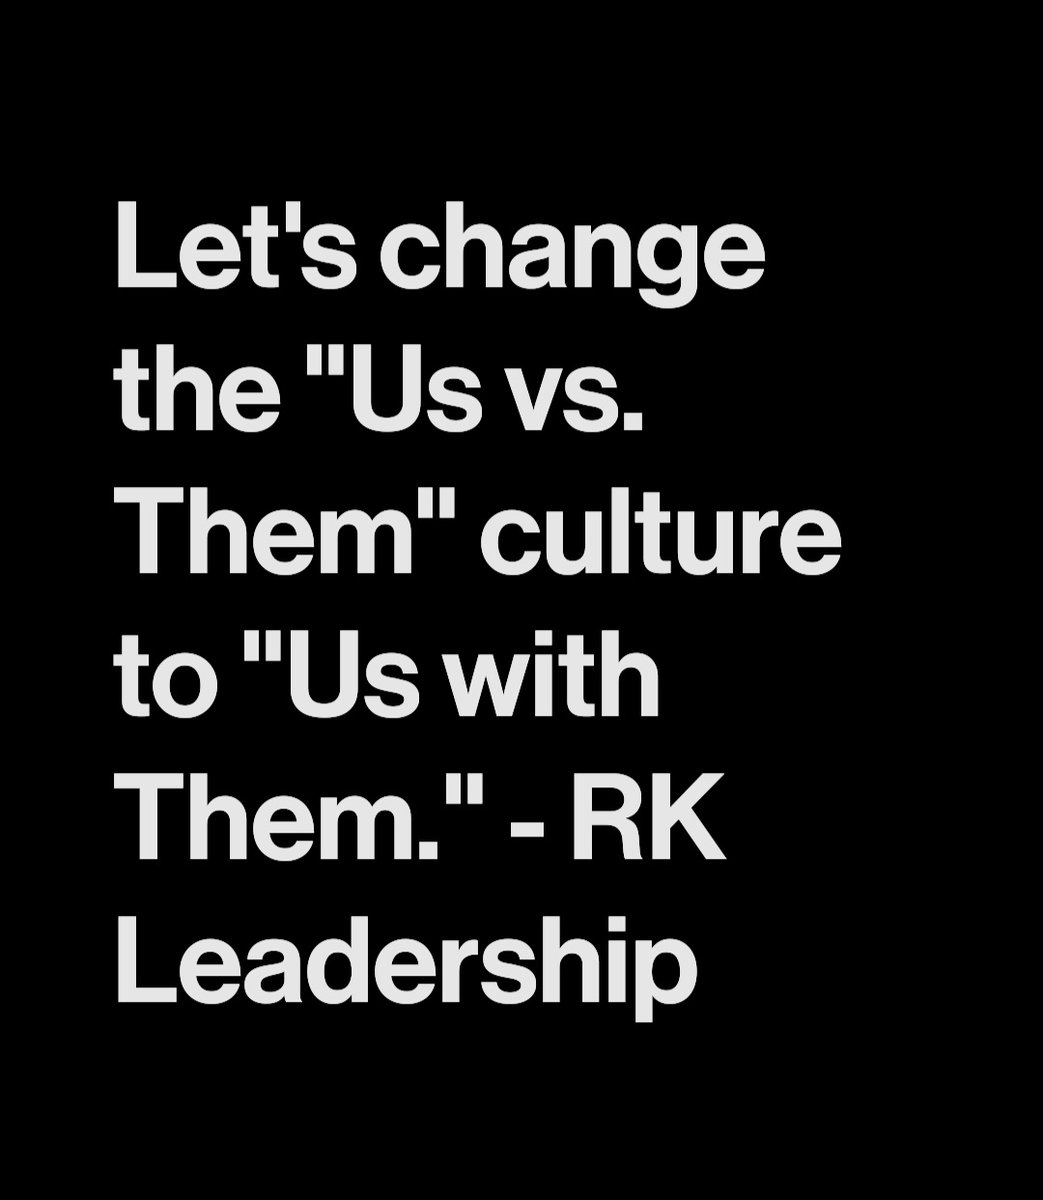 Here is your assignment leaders!

#leadership #change #culture #worktogether